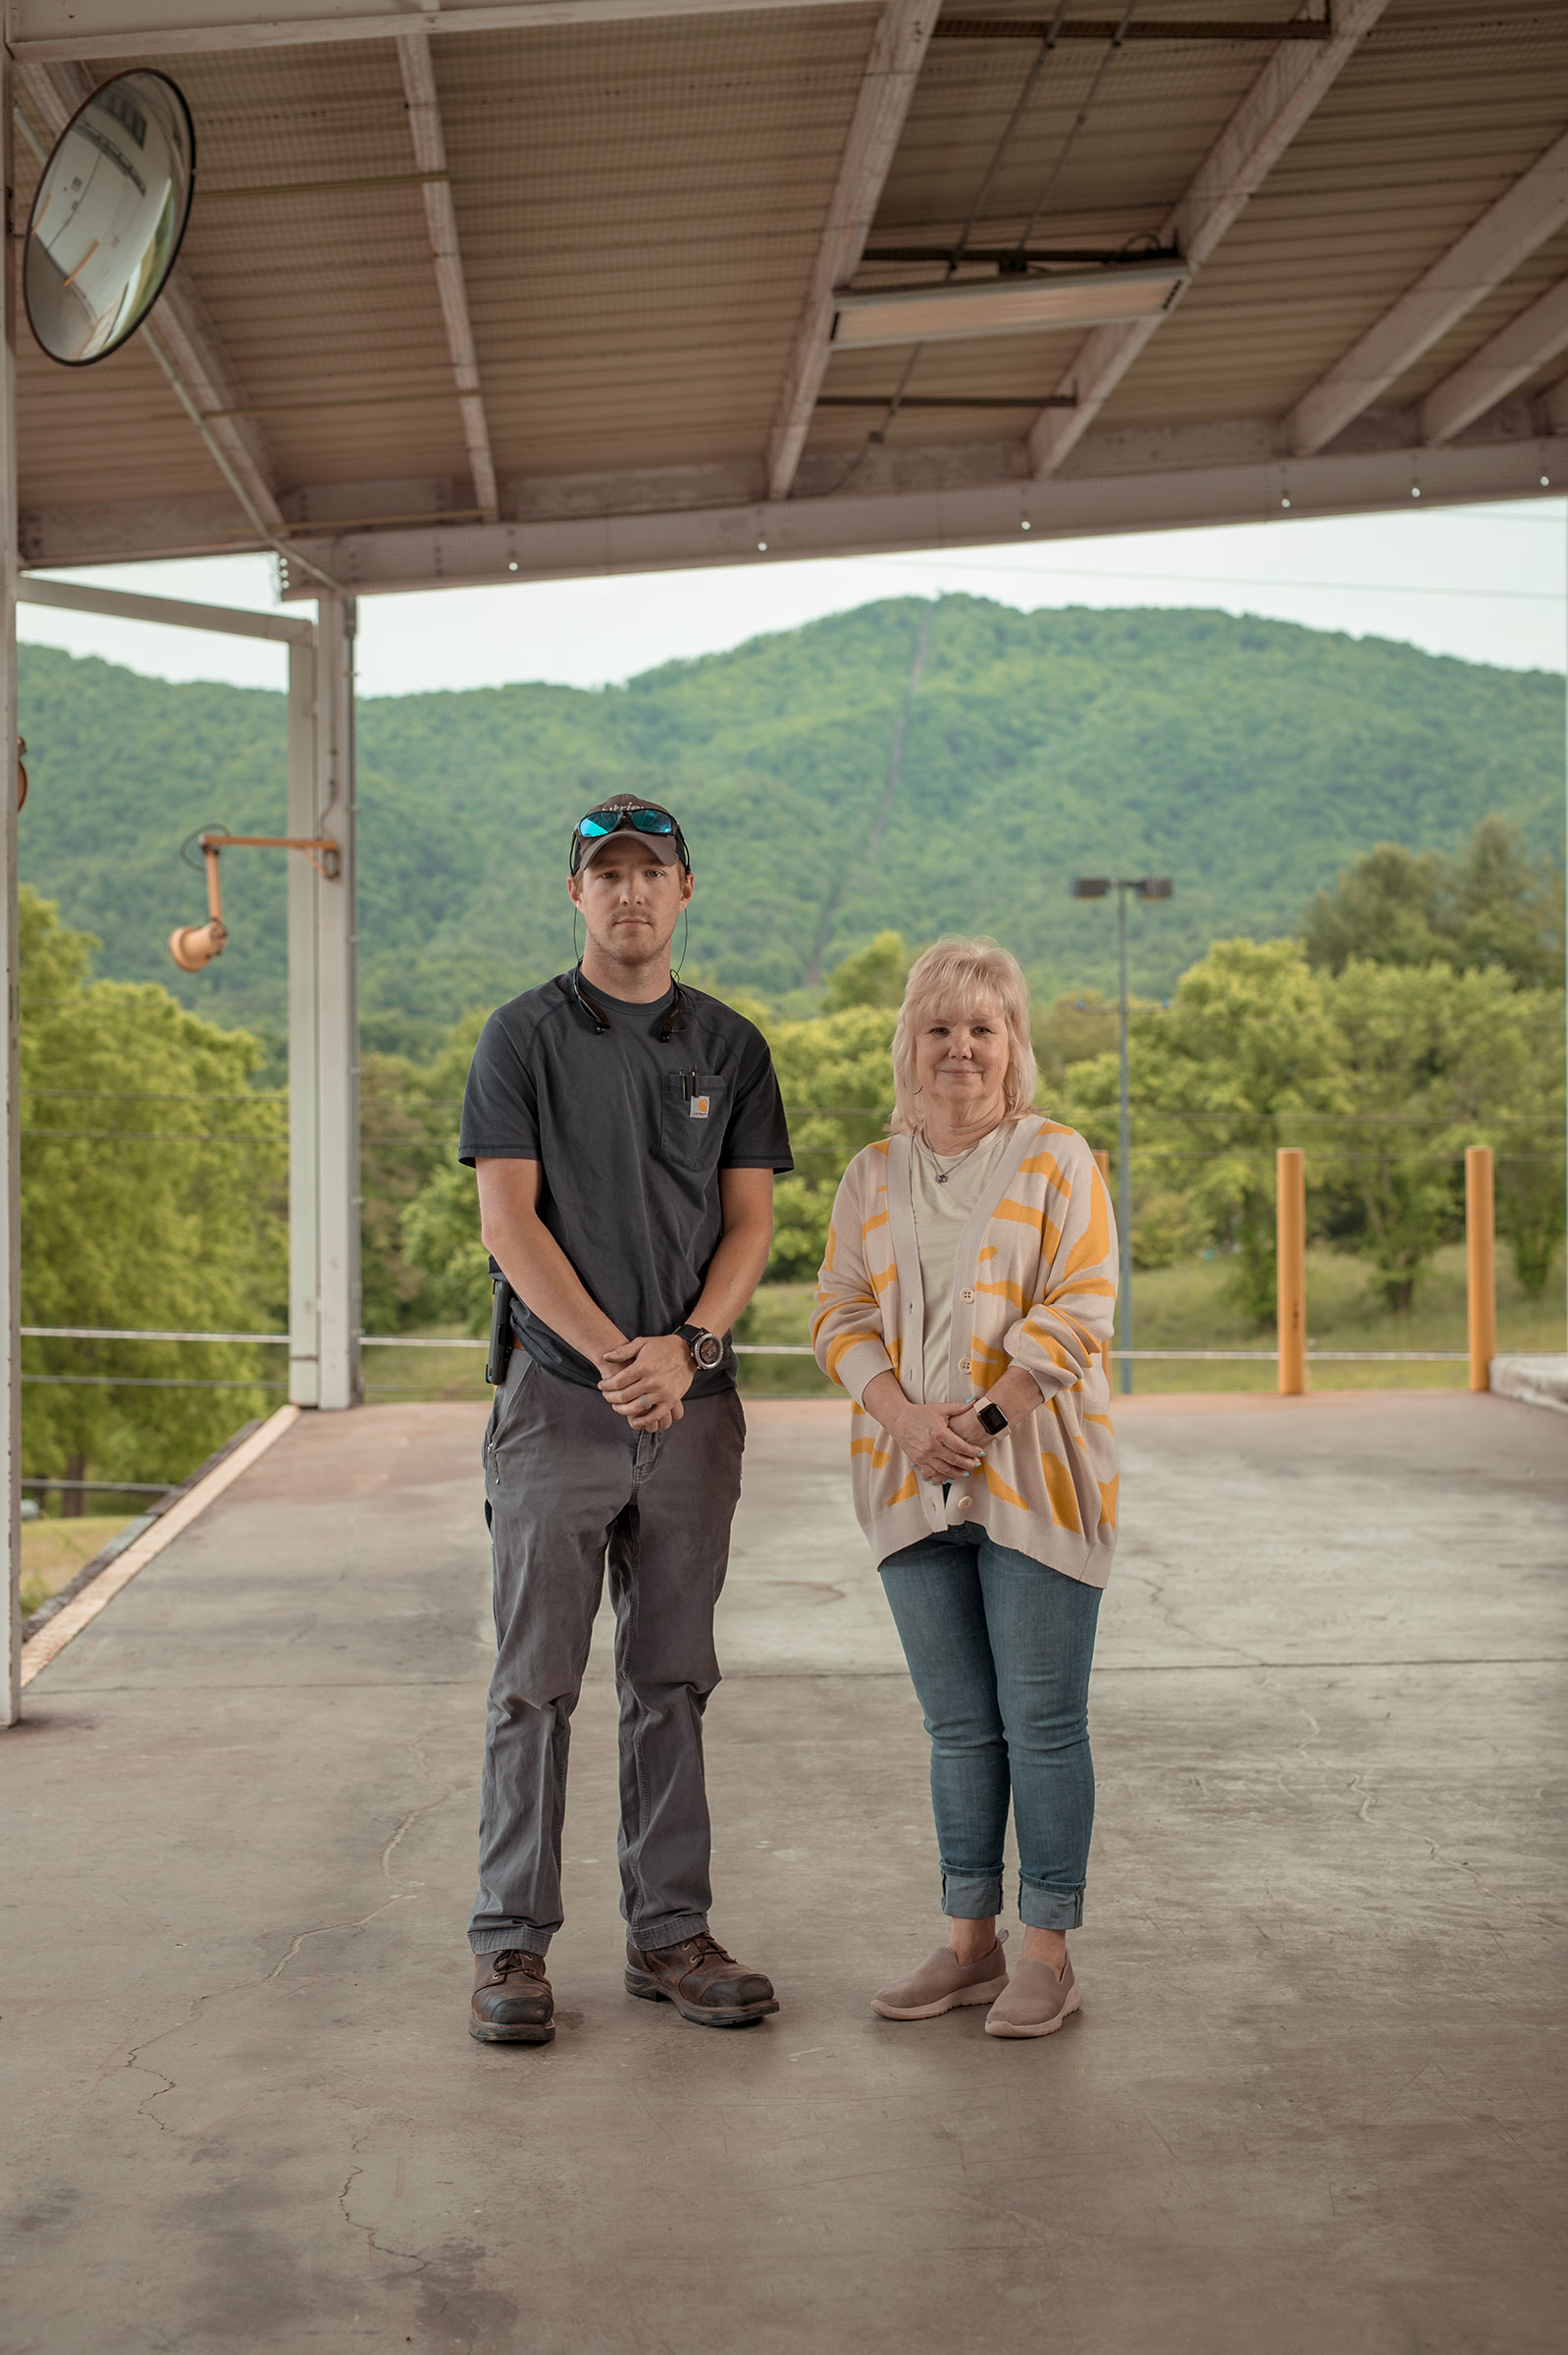 Renea Jones, owner of Jones and Church Farms tomato farm, and her son, Nick Rogers